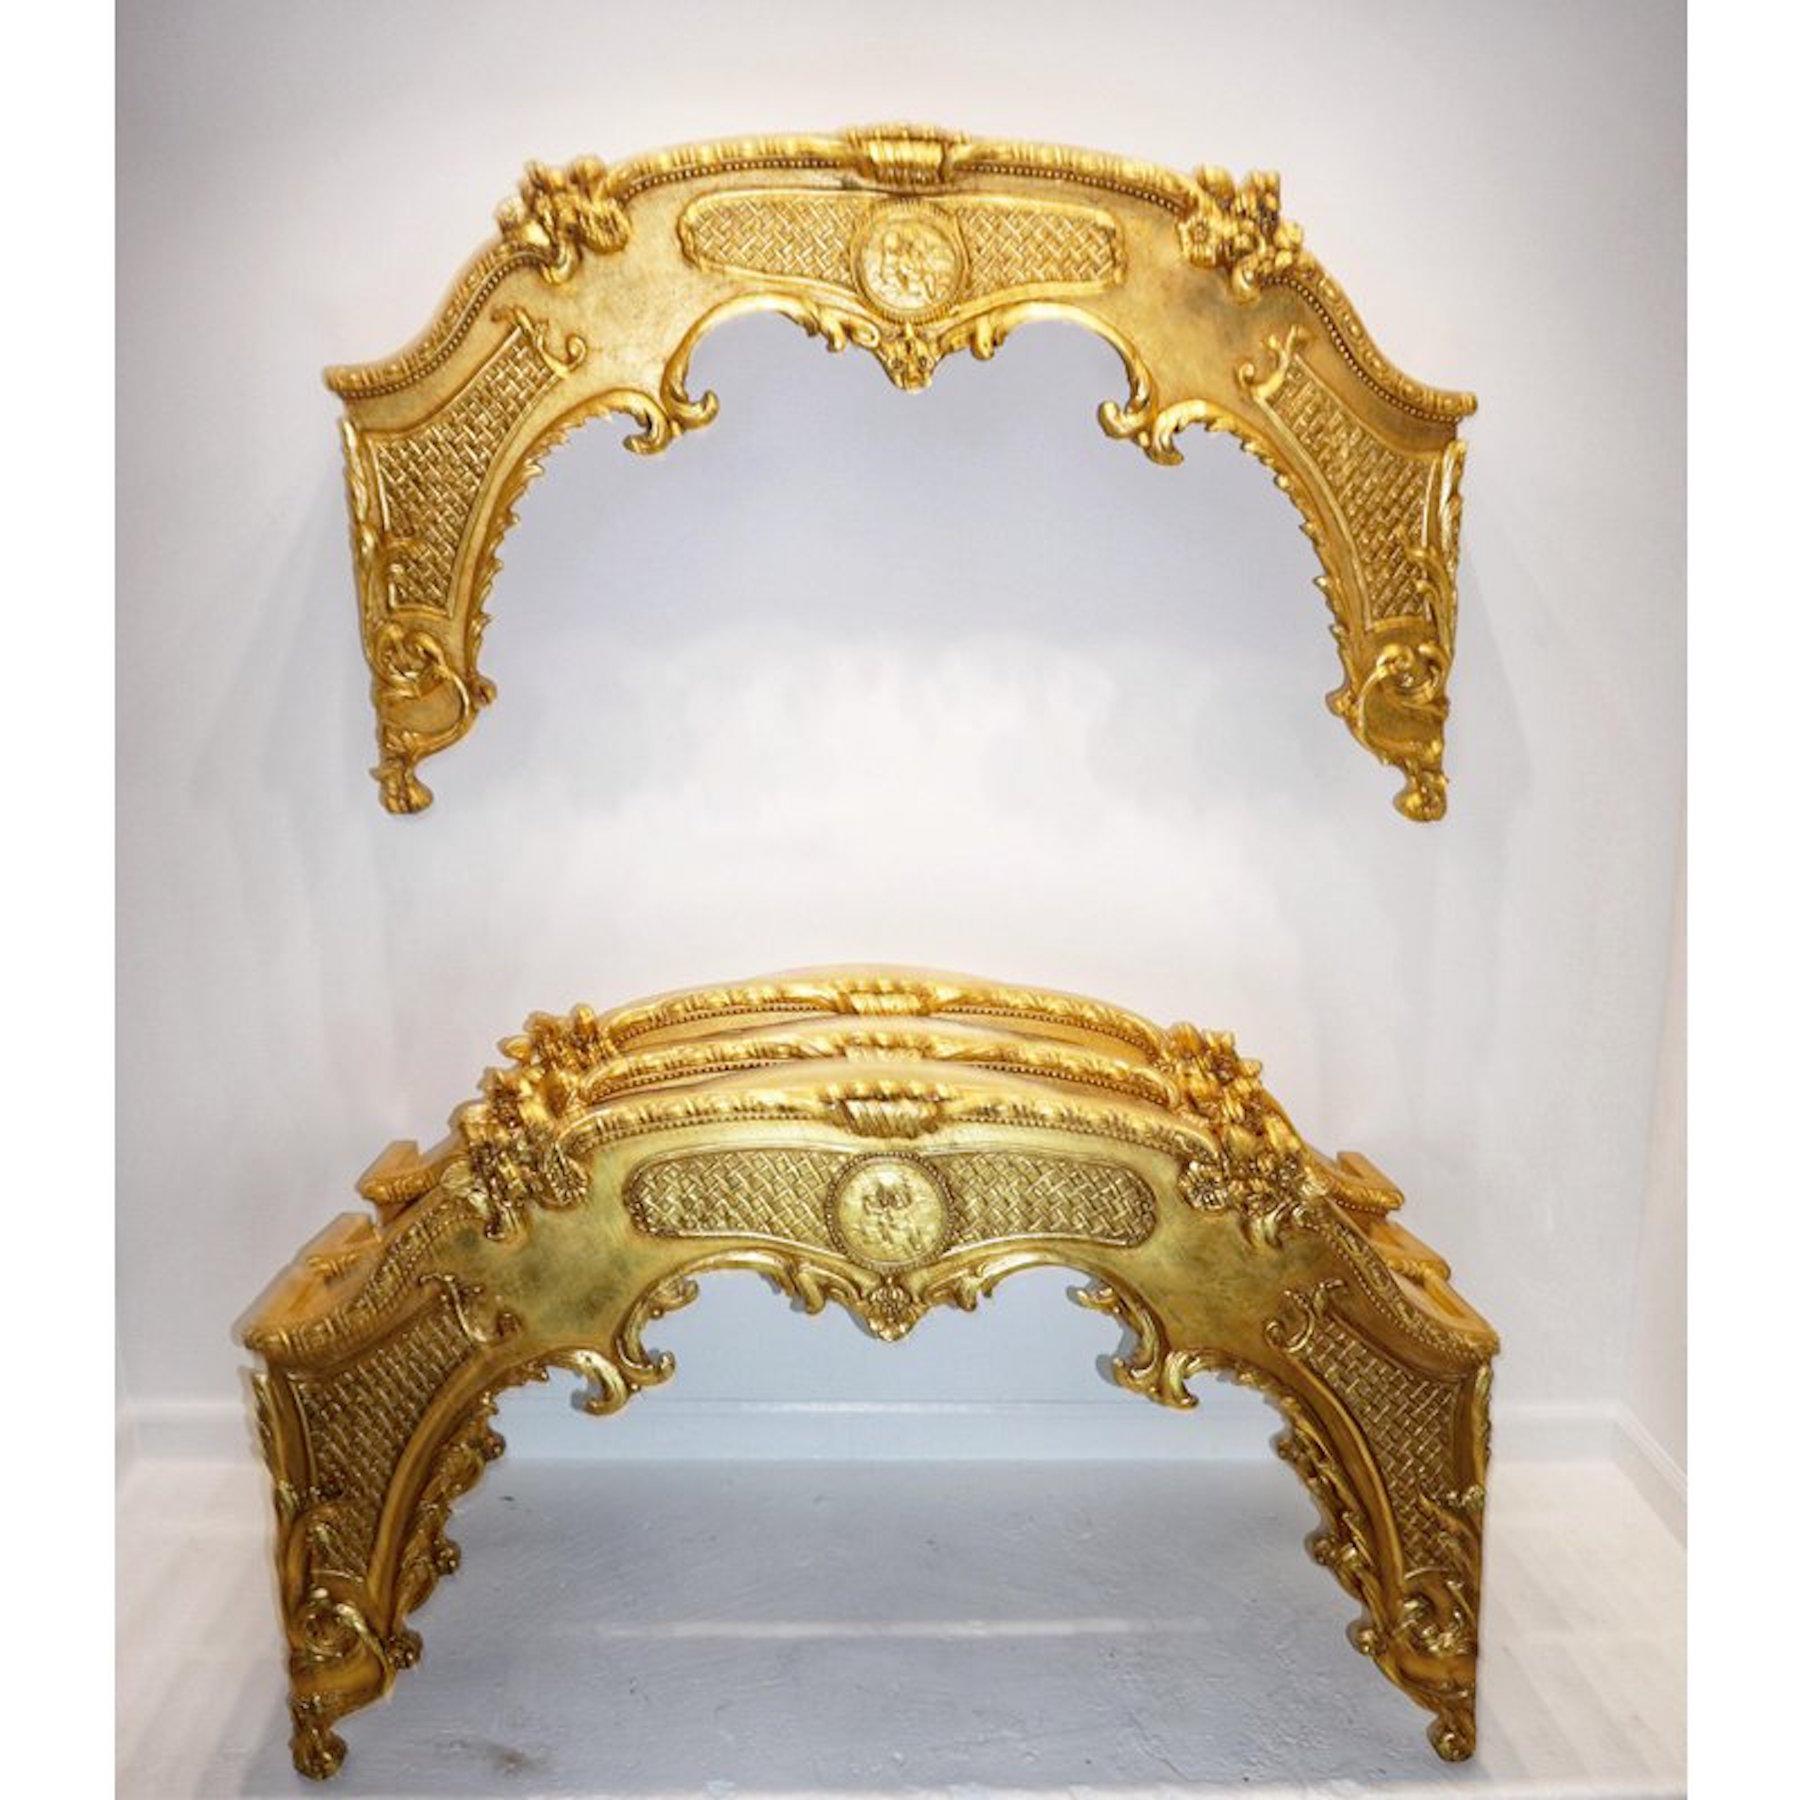 Louis XVI Style Giltwood Window Cornice, Four Available, each one finely decorated with carved floral garlands and a centre cartouche of putti
Three cornices are decorated on all sides, one is missing the right side panel, this one would have to go